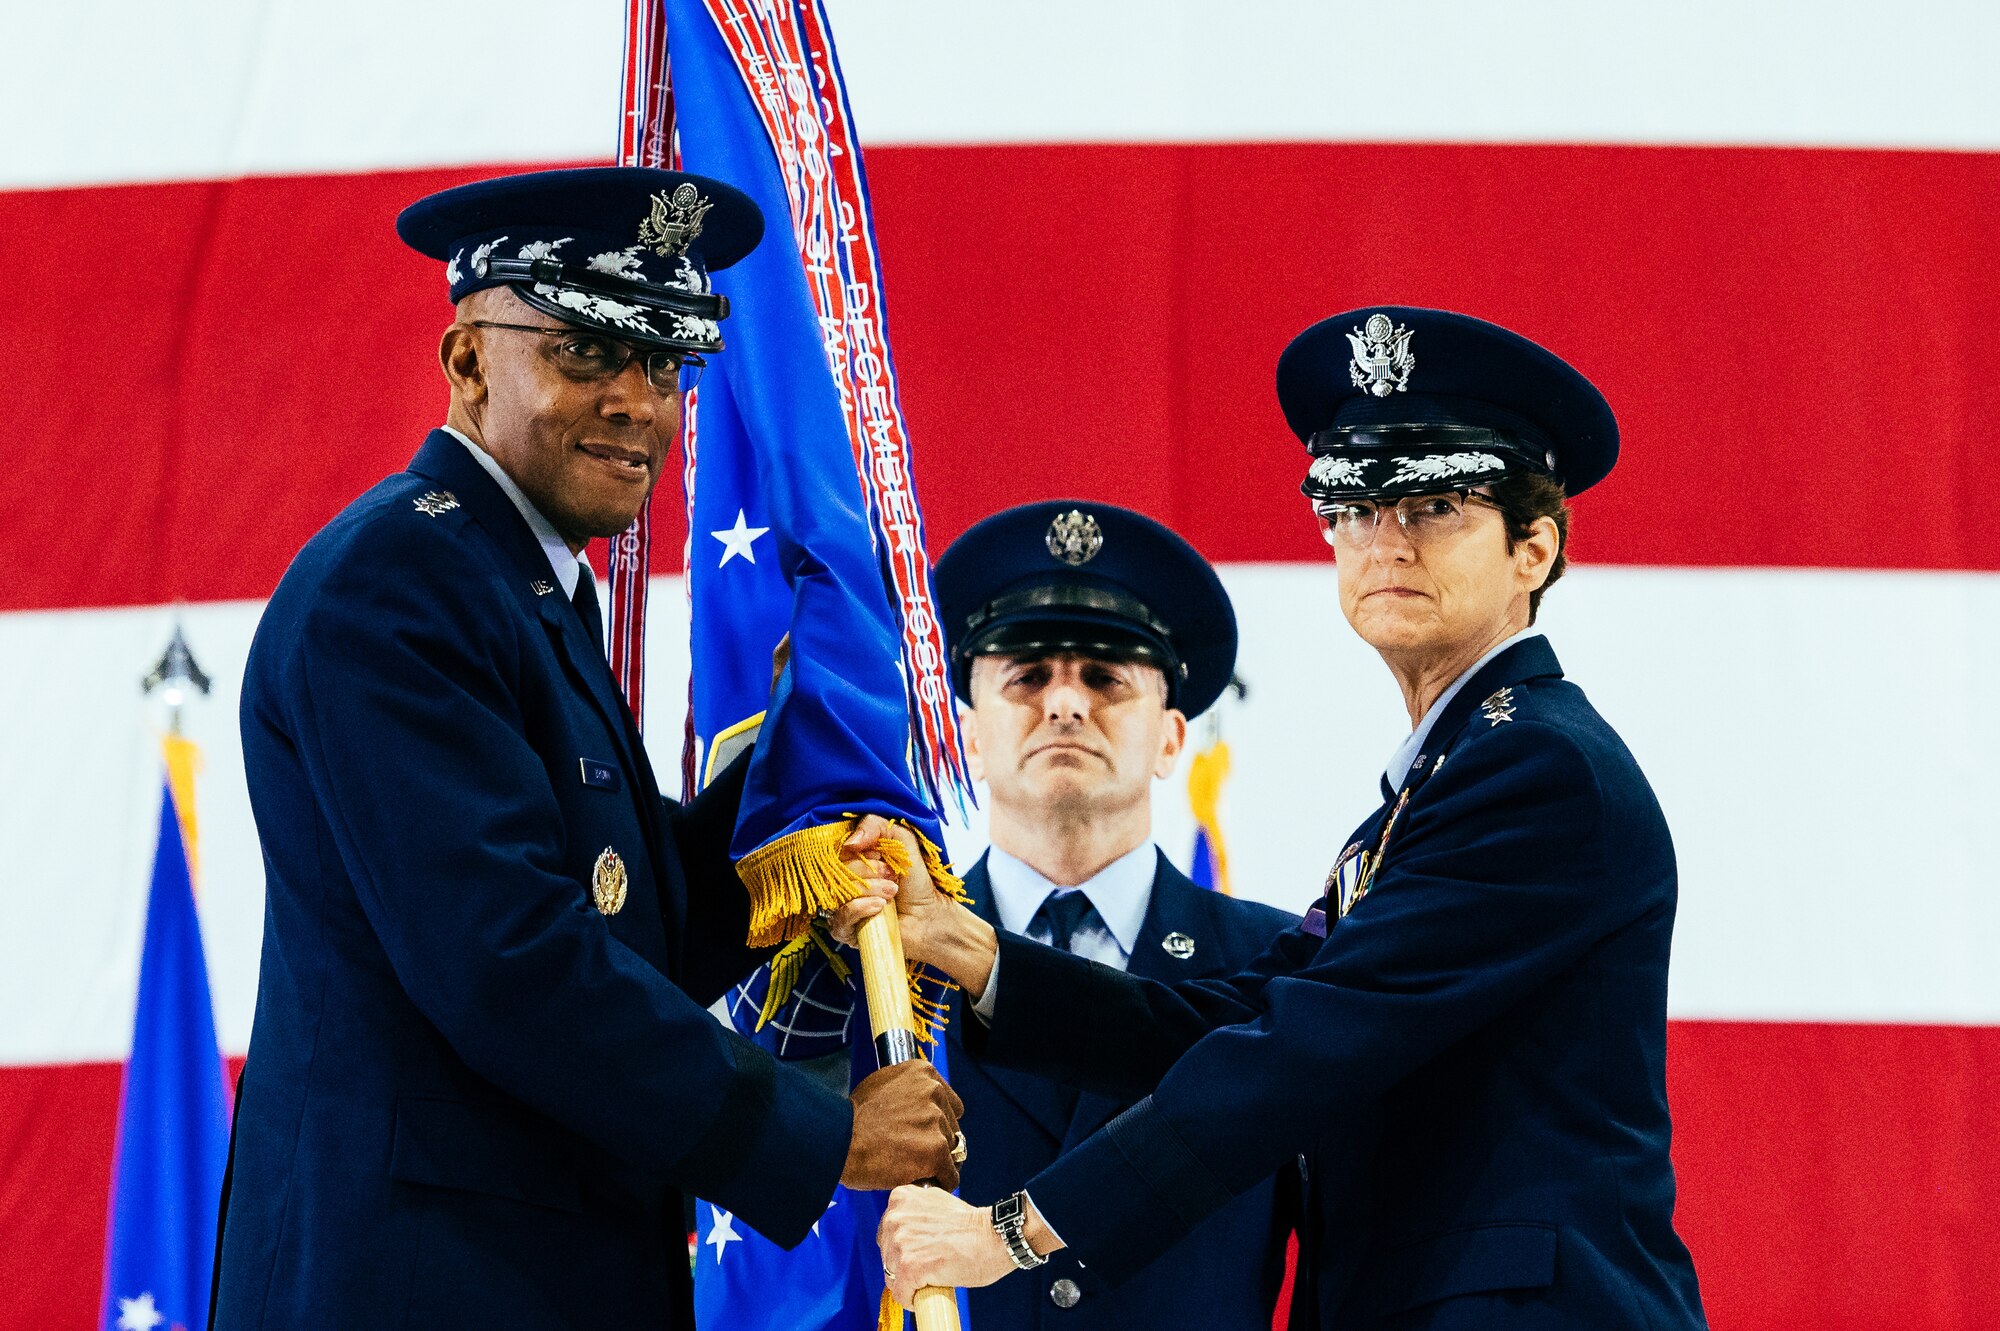 U.S. Air Force Gen. Jacqueline D. Van Ovost, right, outgoing Air Mobility Command commander, relinquishes command to Air Force Chief of Staff Gen. CQ Brown, Jr., during the AMC change of command ceremony at Scott Air Force Base, Illinois, Oct. 5, 2021. AMC provides rapid global mobility and sustainment for America’s armed forces. (U.S. Air Force Photo by Airman 1st Class Isaac Olivera)